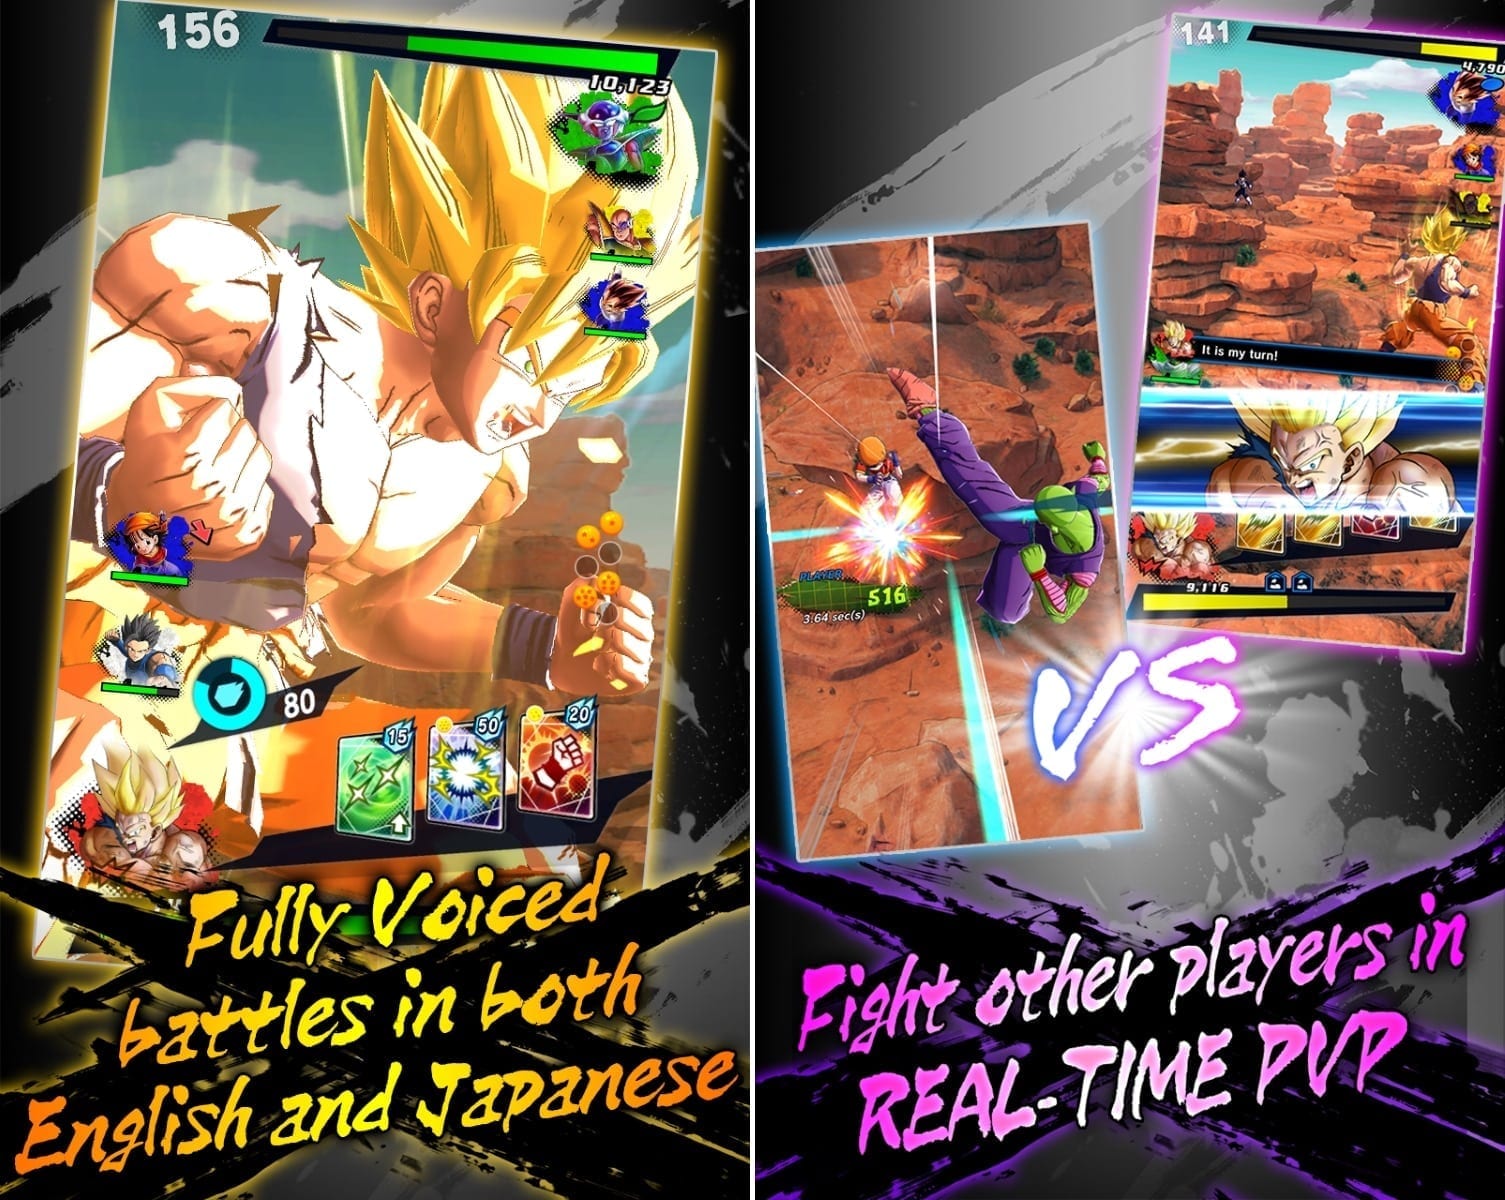 Dragon Ball Legends - Real-time multiplayer PVP mobile game launches worldwide - MMO Culture